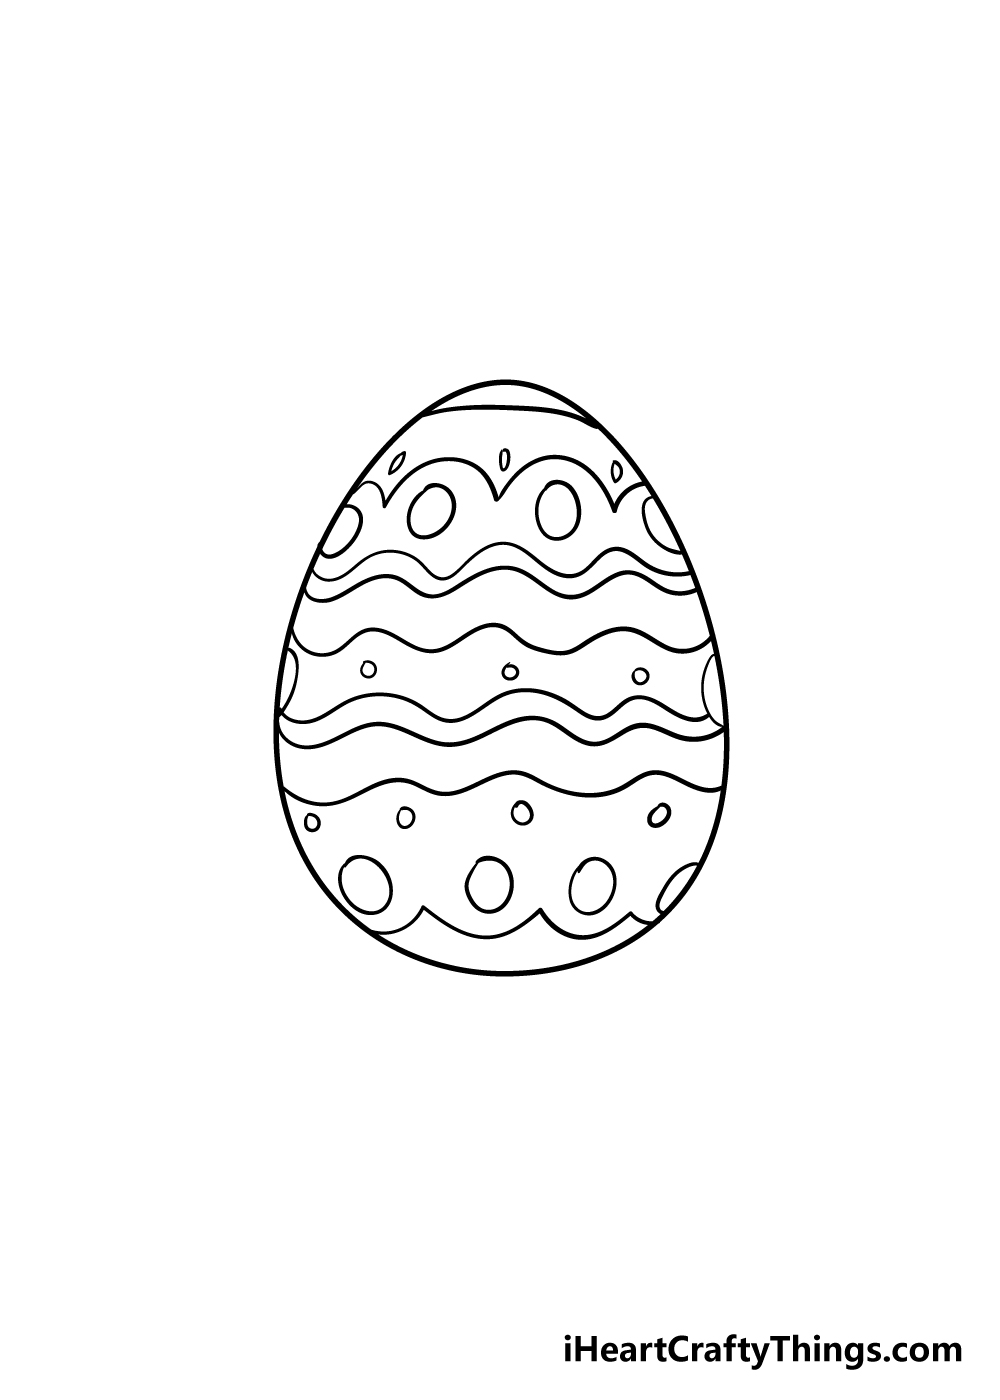 Easter egg drawing step 5